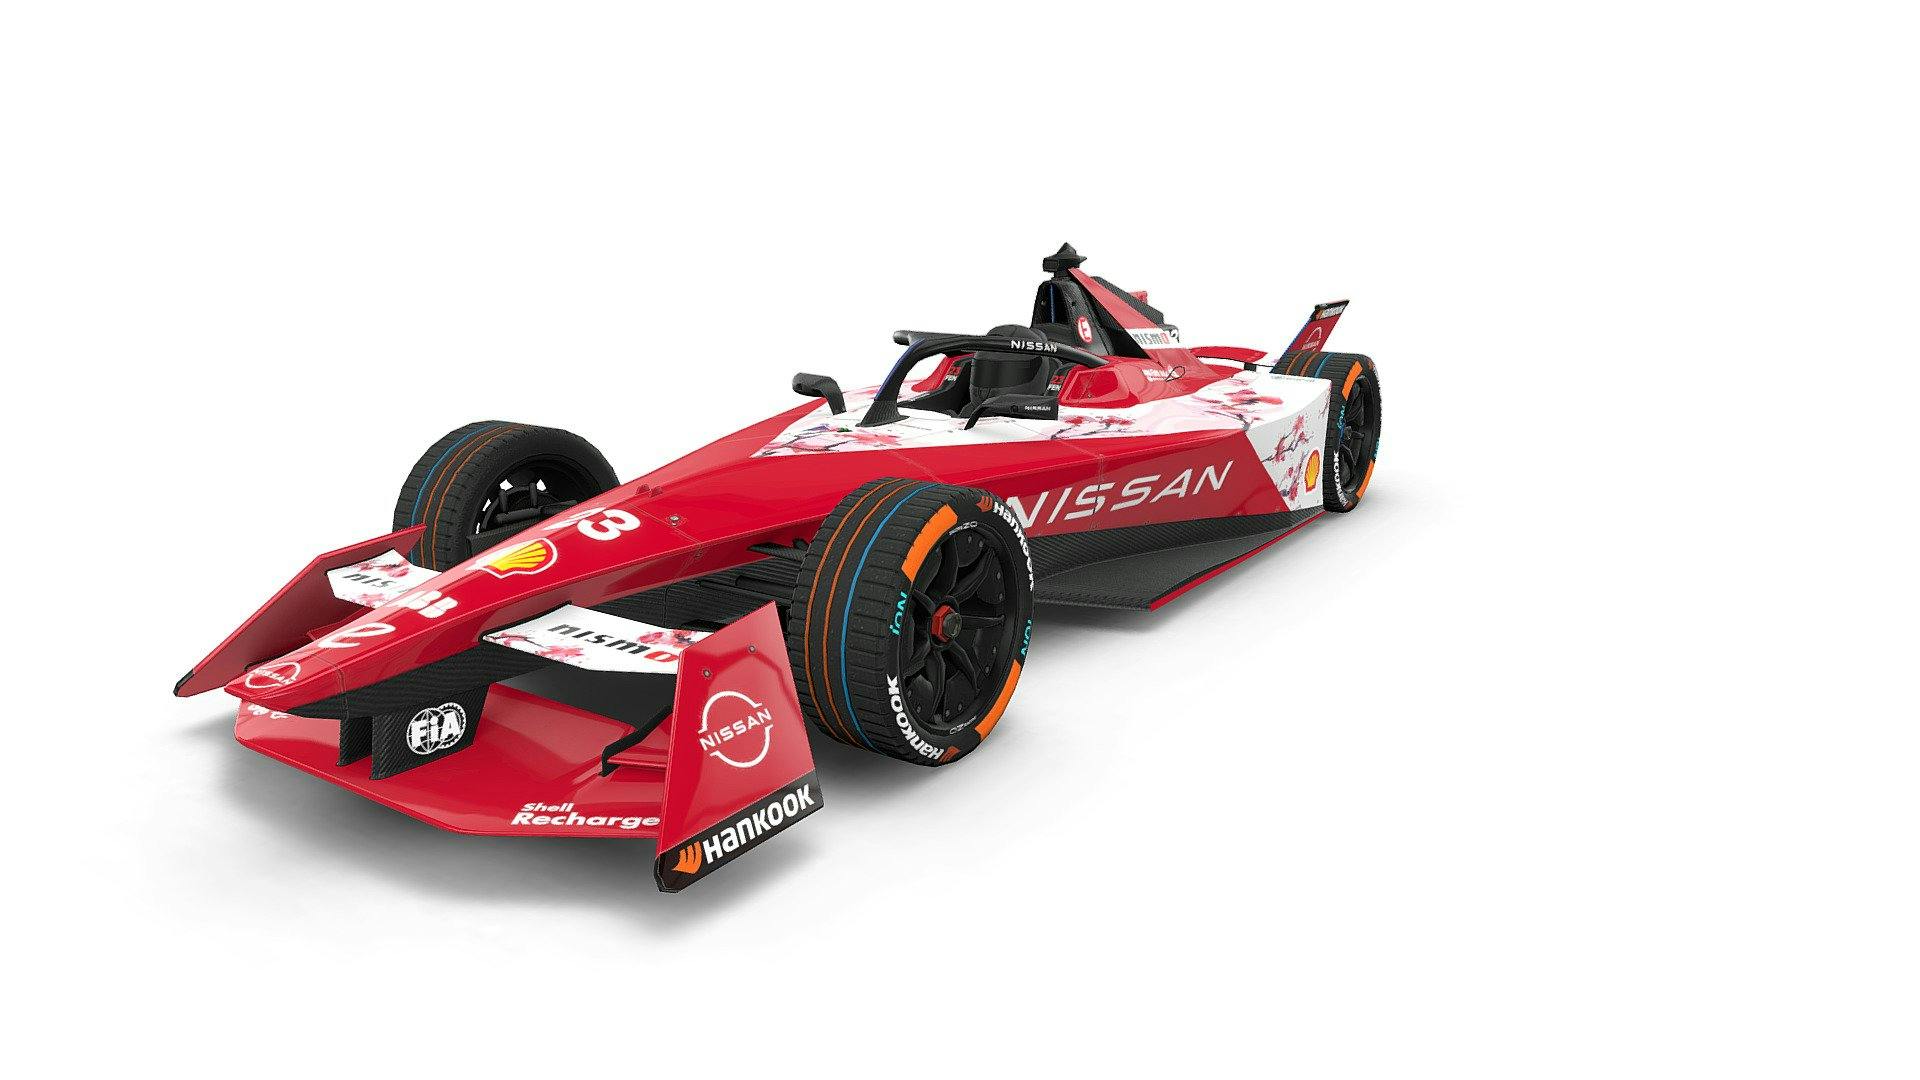 Nissan electric racing cars - Our Nismo Formula E